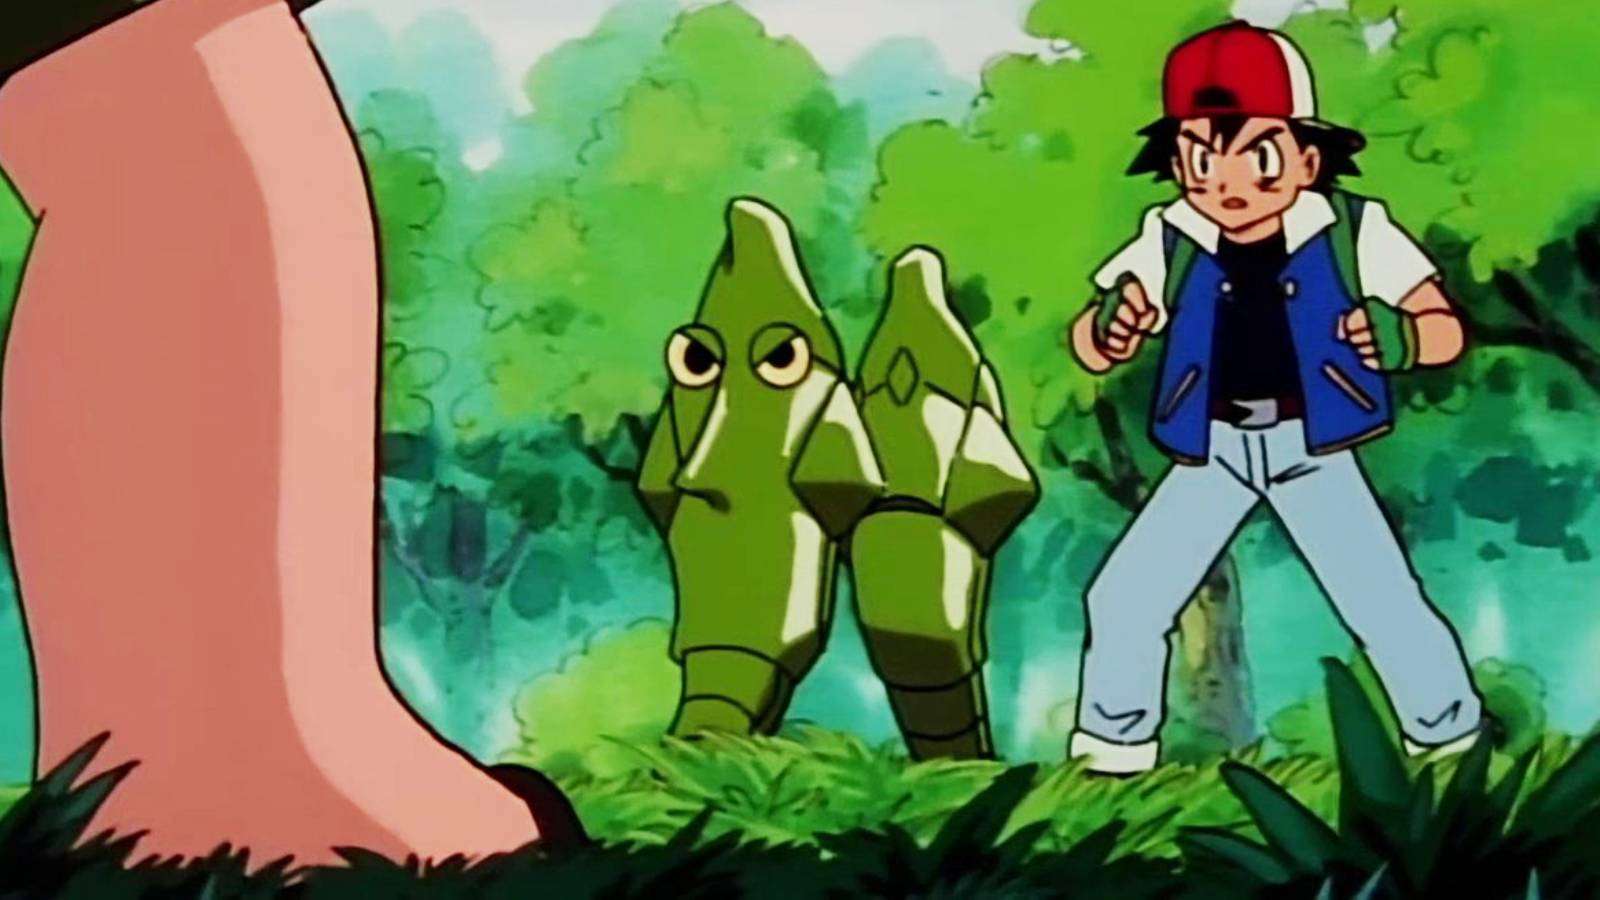 A still from the Pokemon anime shows Ash Ketchum and another trainer fighting, with both using a Metapod to battle